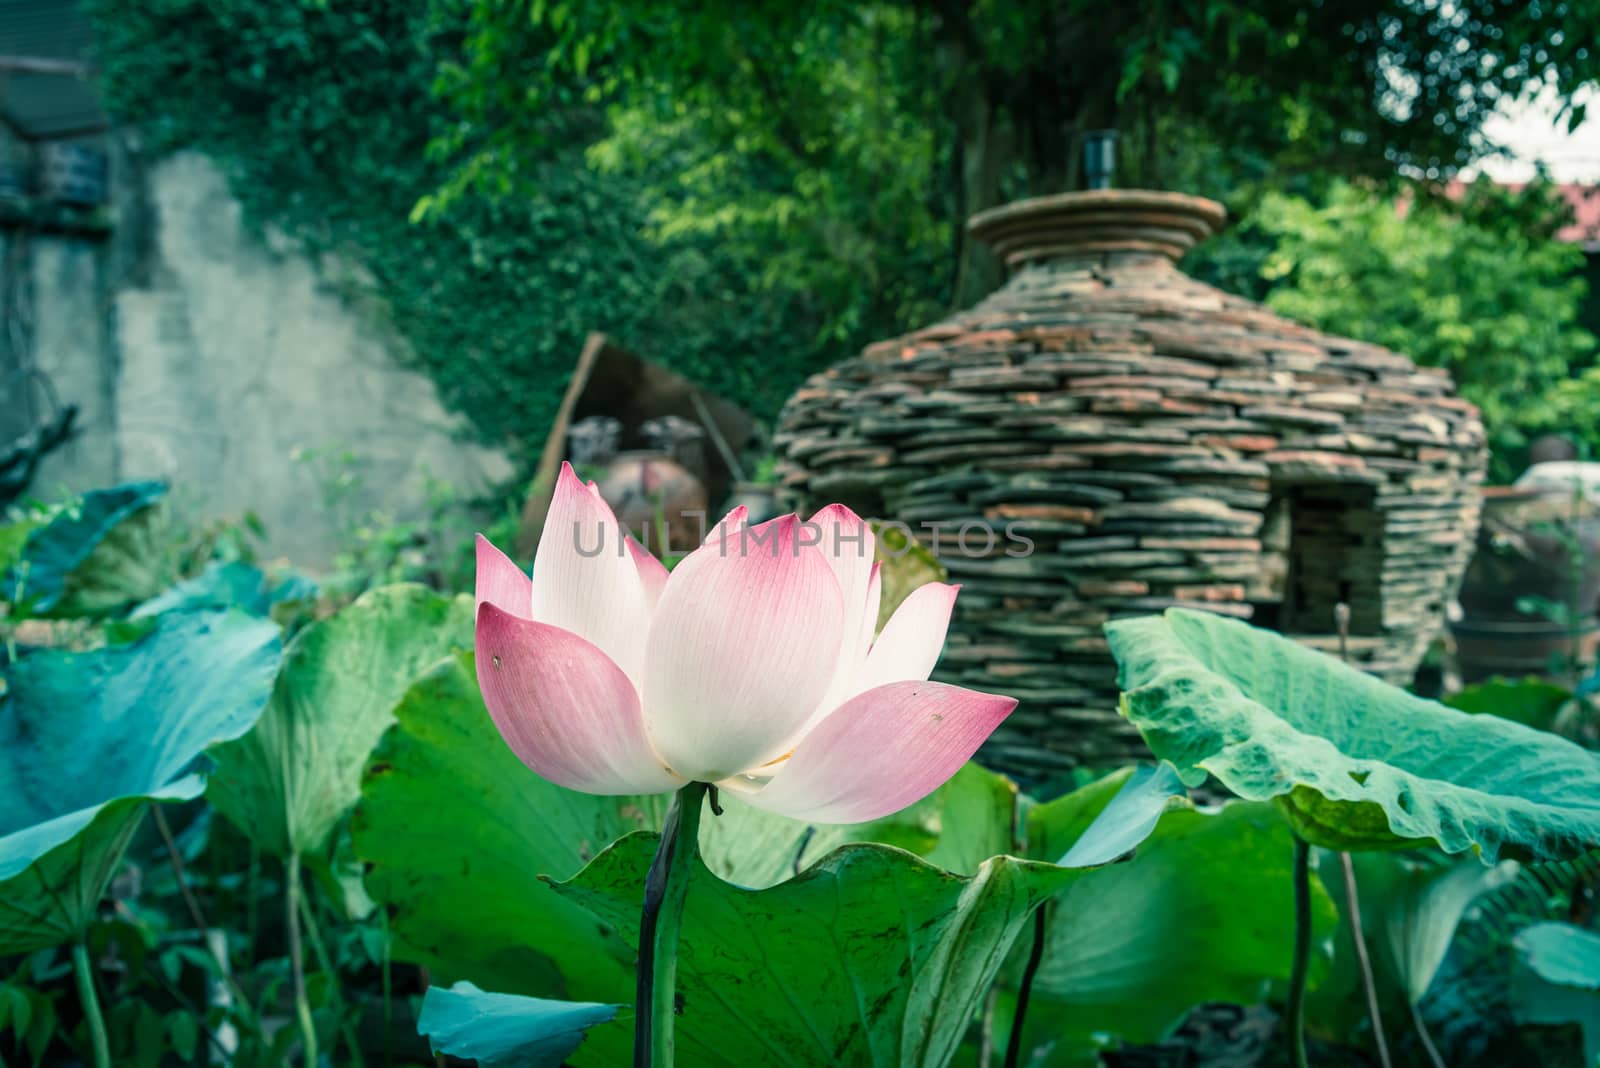 Single blossom pink lotus flower with ceramic pot fountain jar in background. Lotus is national flower of India and Vietnam